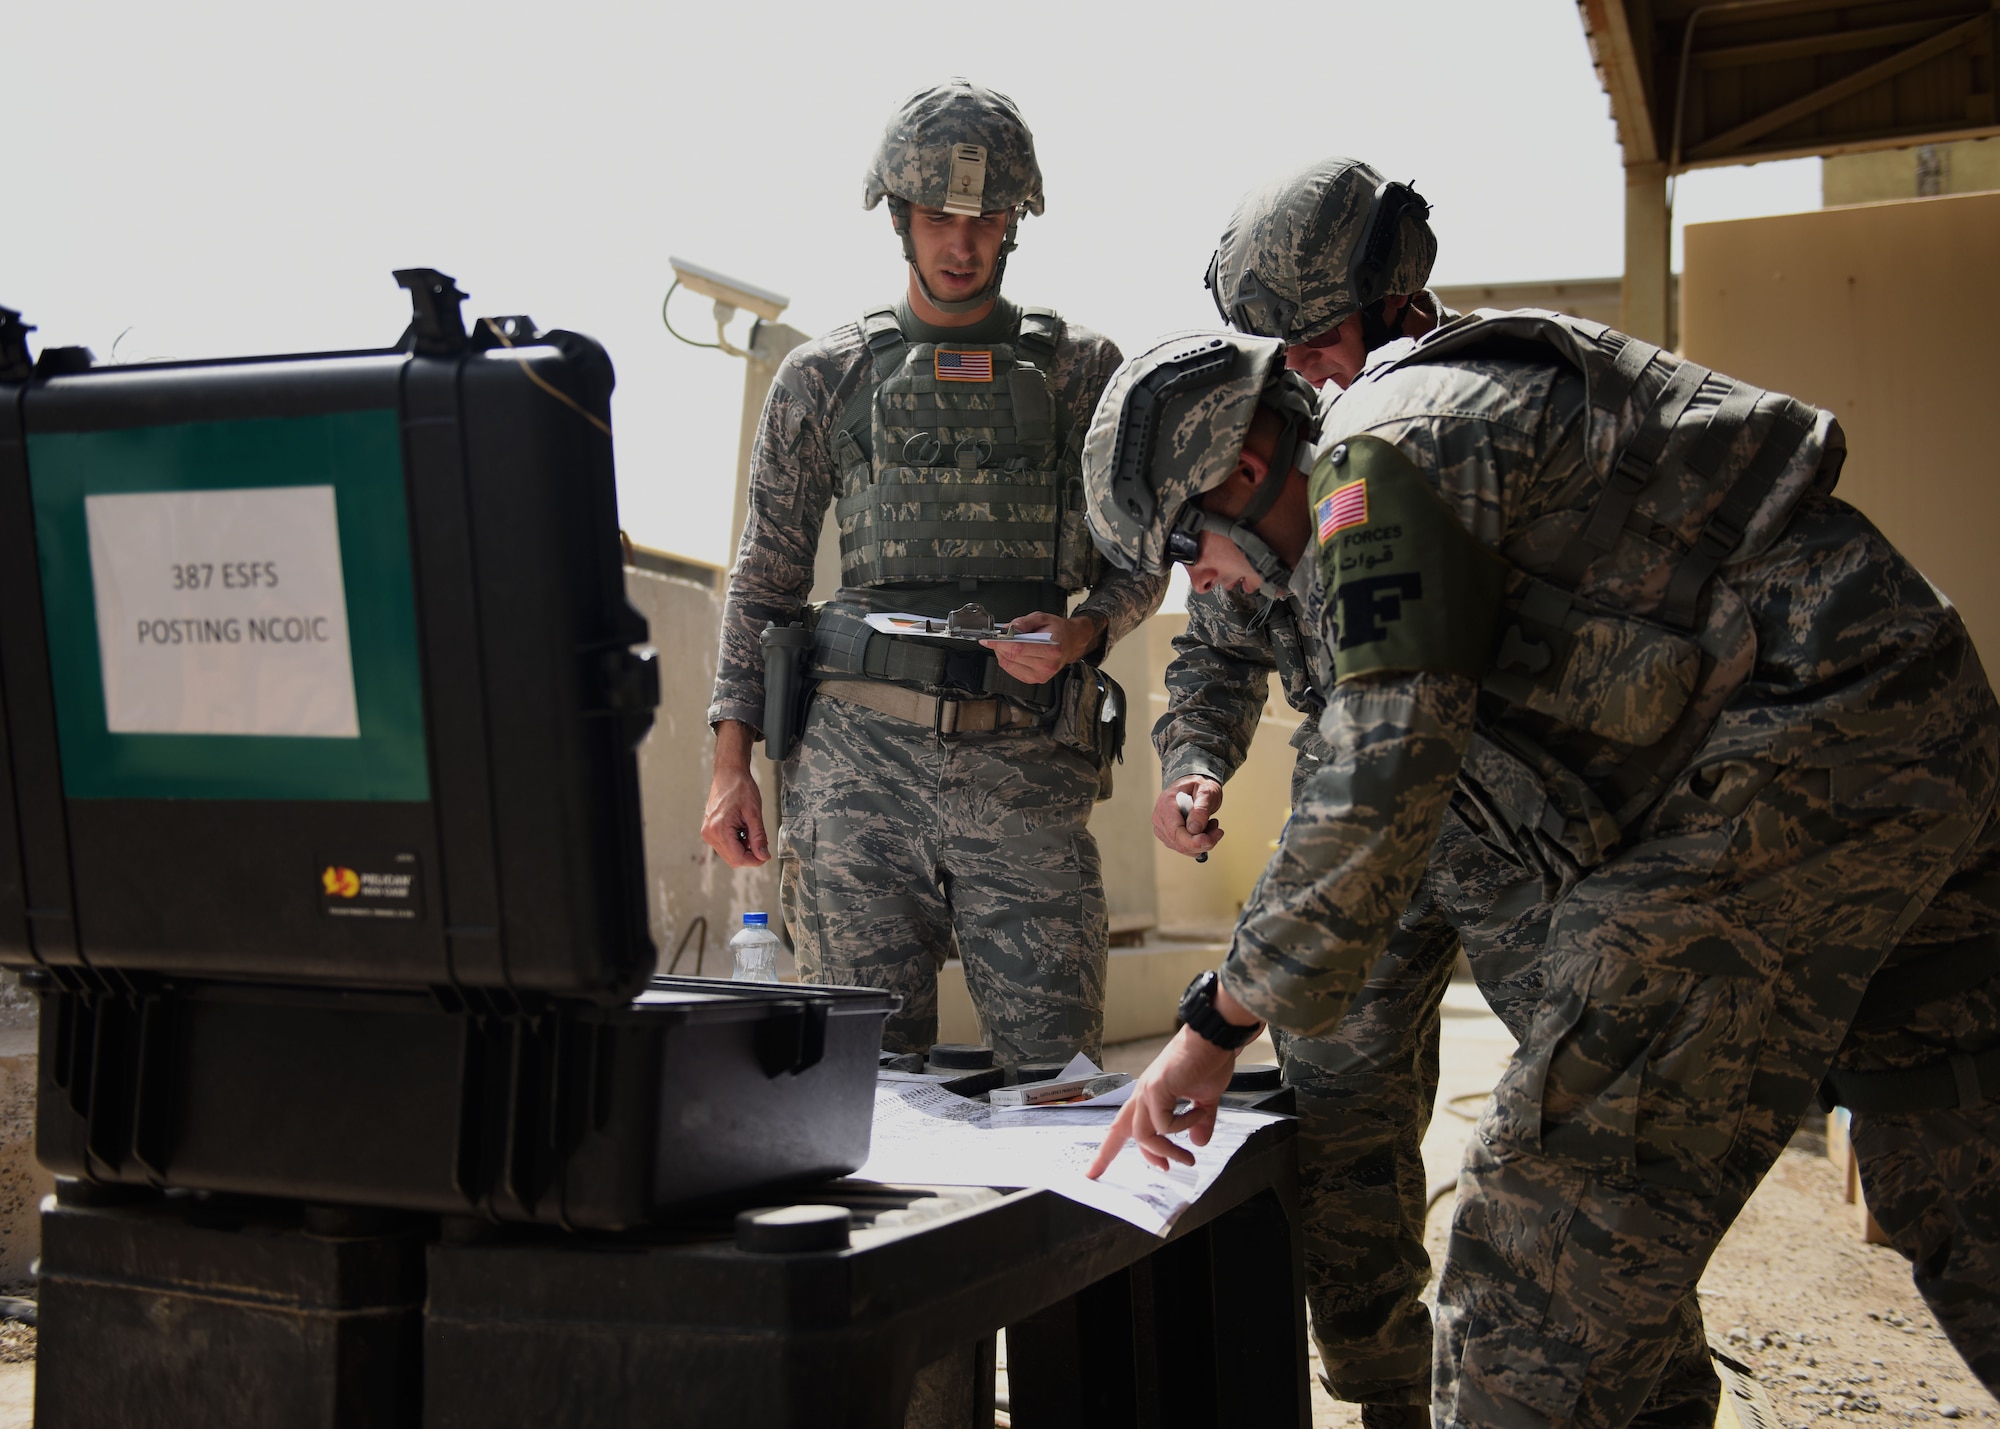 Several 387th Expeditionary Security Forces response team members discuss postings for personnel during a force protection condition delta exercise at an undisclosed location in Southwest Asia, April 27, 2017. The 387th Air Expeditionary Group conducted a force protection condition delta exercise to demonstrate base defense capabilities in response to increased terrorist threat levels. (U.S. Air Force photo/ Tech. Sgt. Jonathan Hehnly)